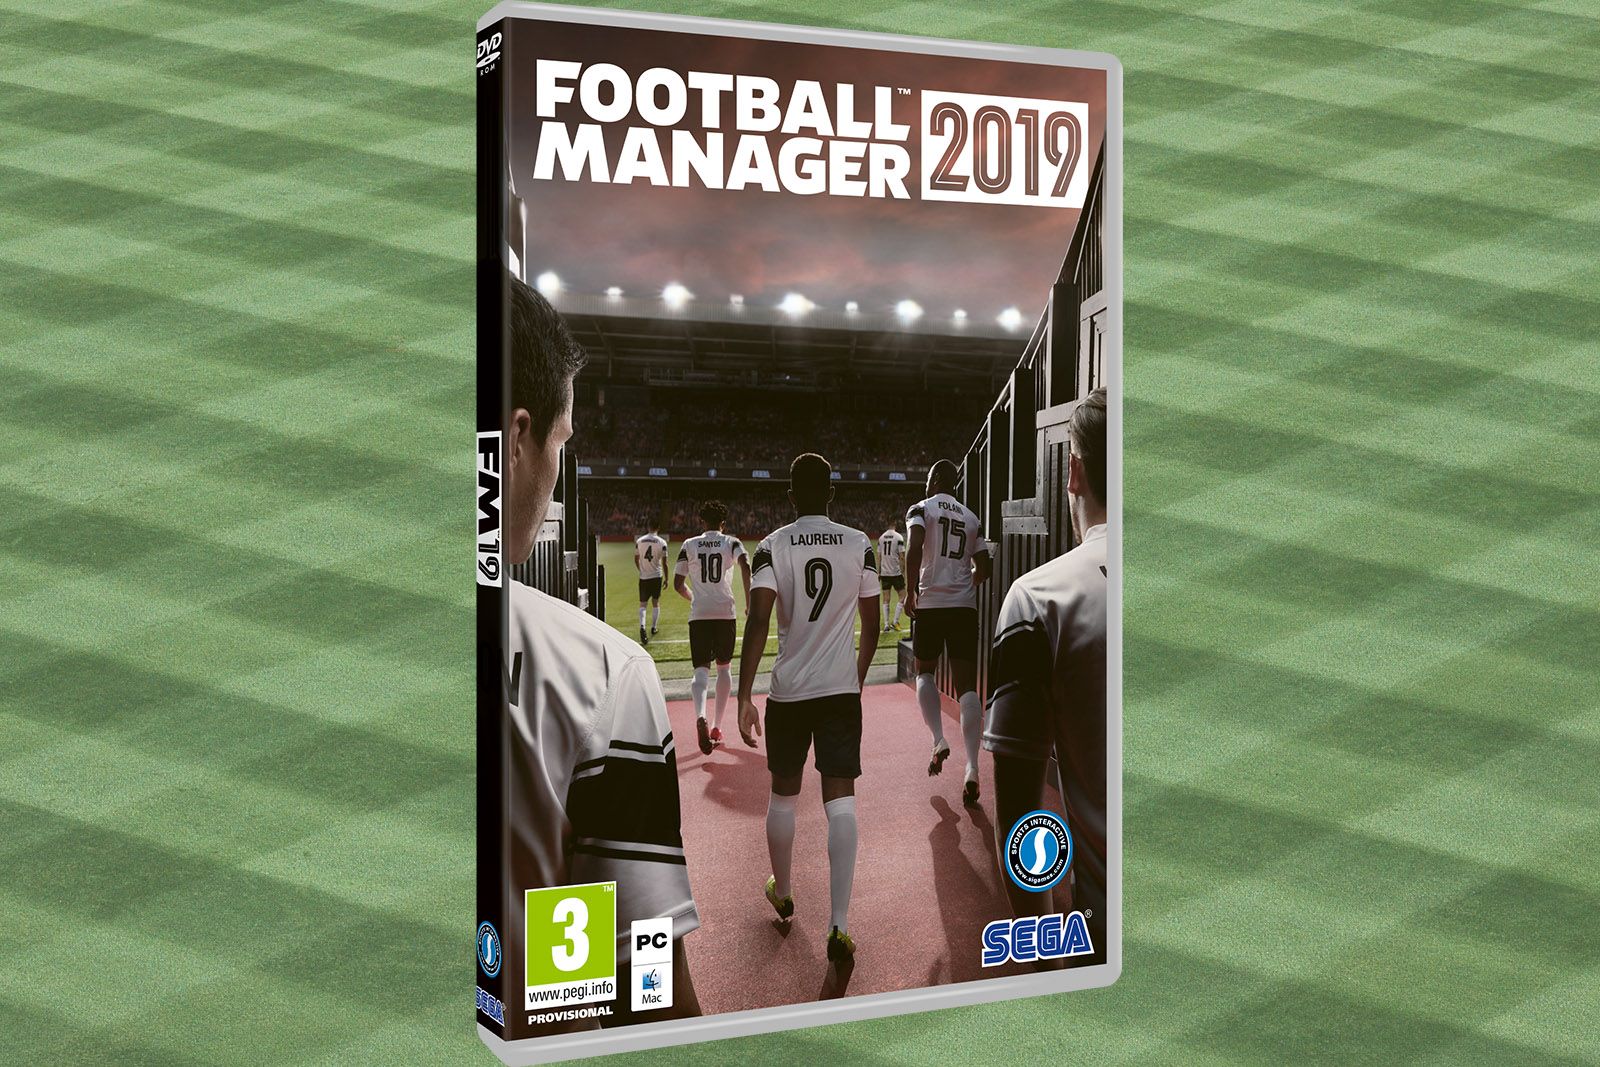 Football Manager 2019 release date trailer formats Bundesliga and all the info so far image 2